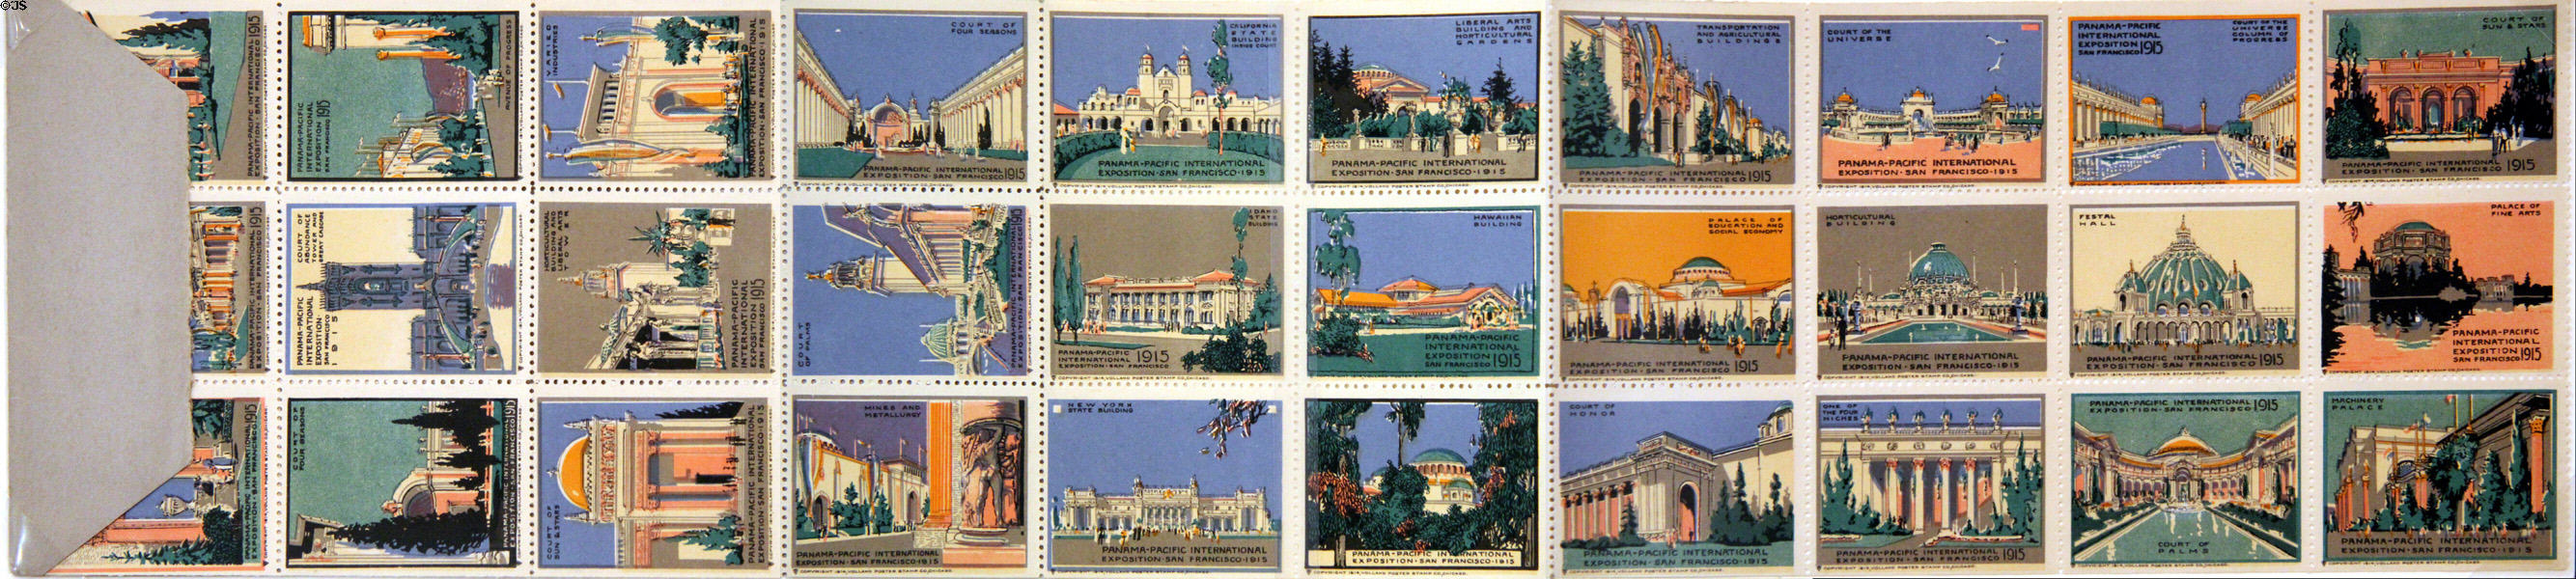 Poster stamps show buildings of Panama-Pacific International Exposition (1915) by Volland Poster Stamp Co. of Chicago at California Historical Society. San Francisco, CA.